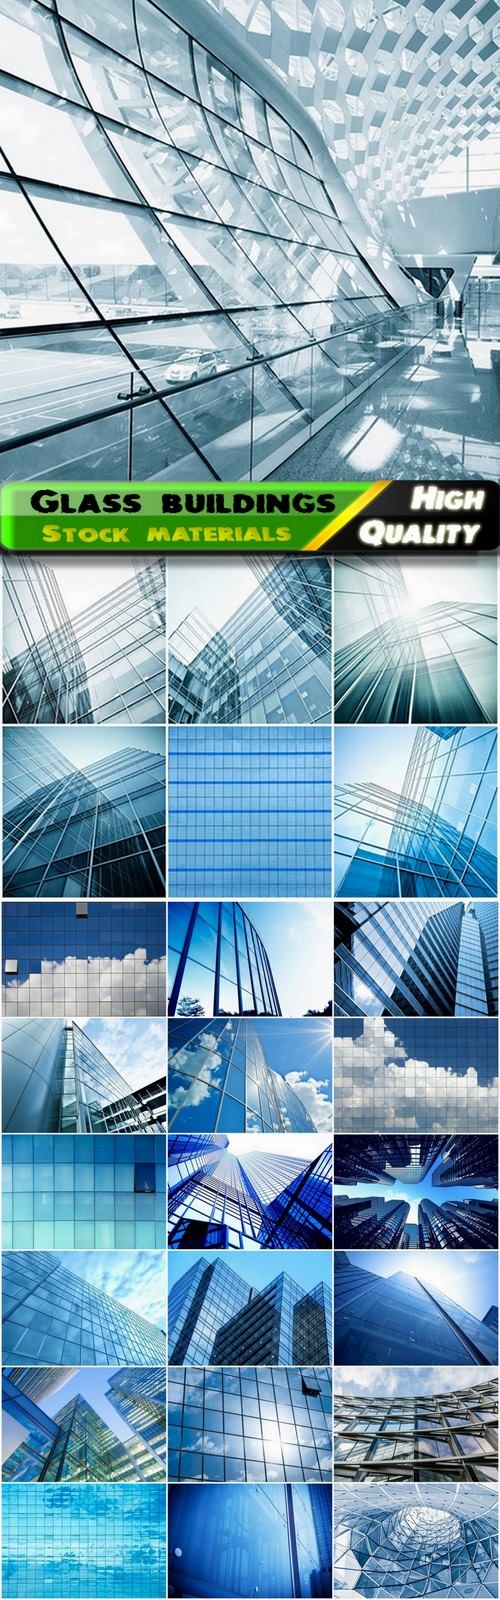 Buildings and skyscrapers with glass blue windows - 25 HQ Jpg